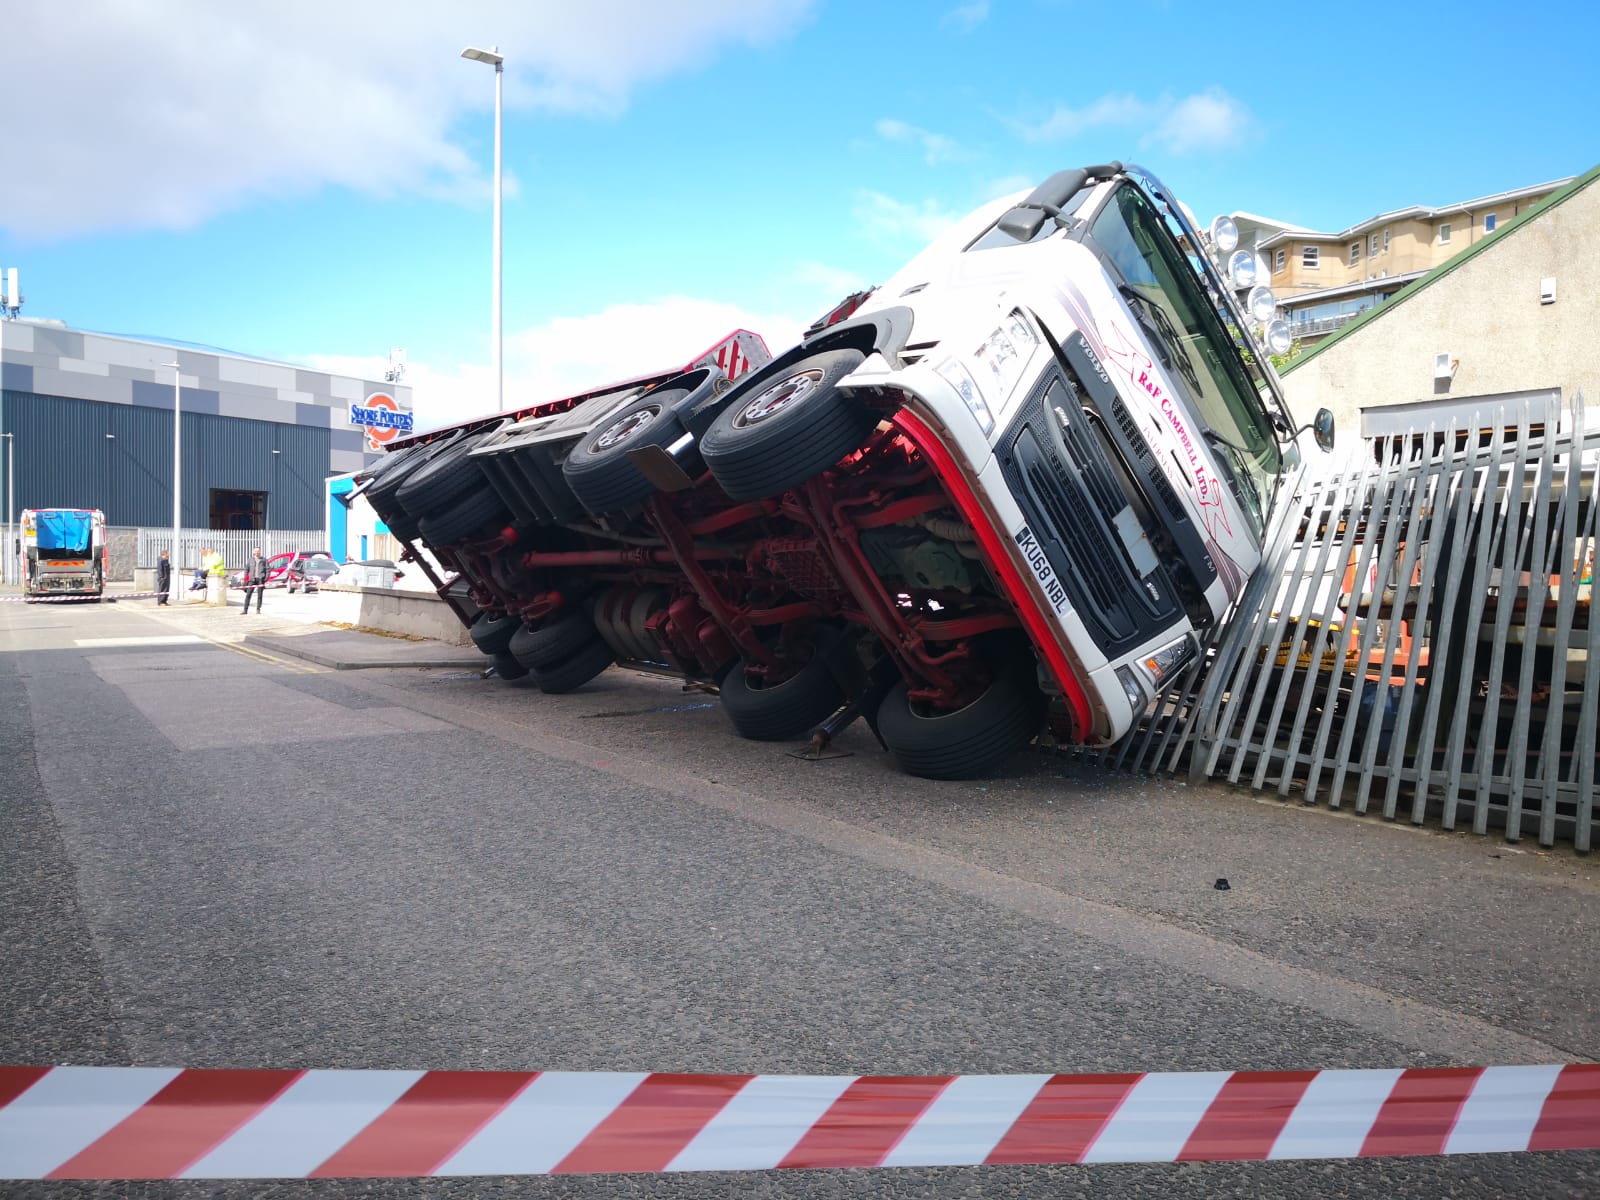 A lorry toppled over during a delivery and pinned a man to a fence.